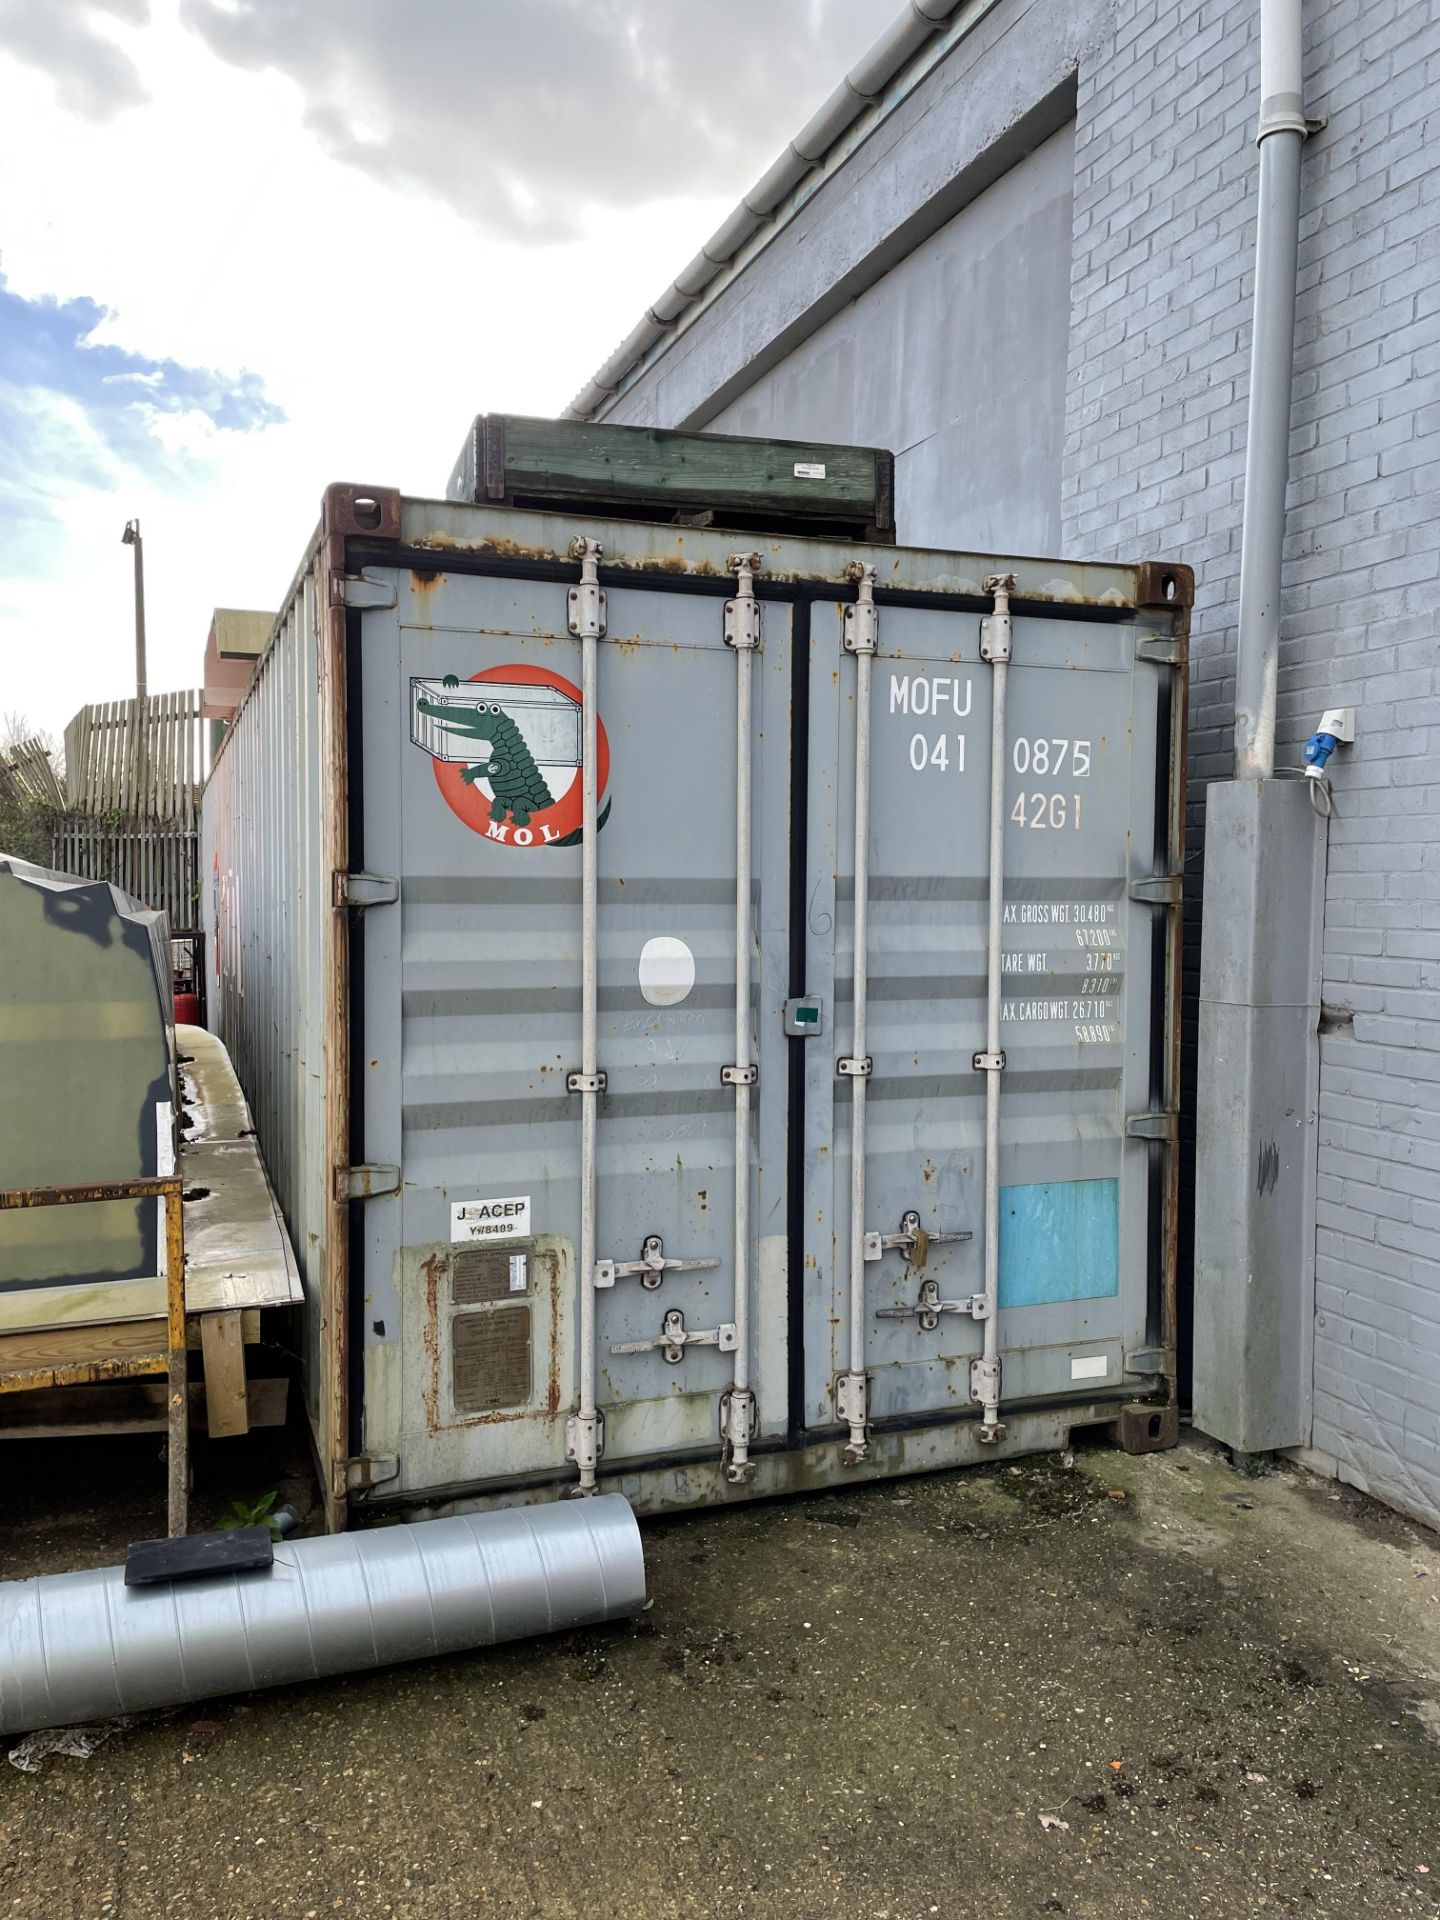 2004 CIMC Type 1AA-091A42G1G 40' Shipping Container S/No. NSSC04B 07636 and Contents to Included